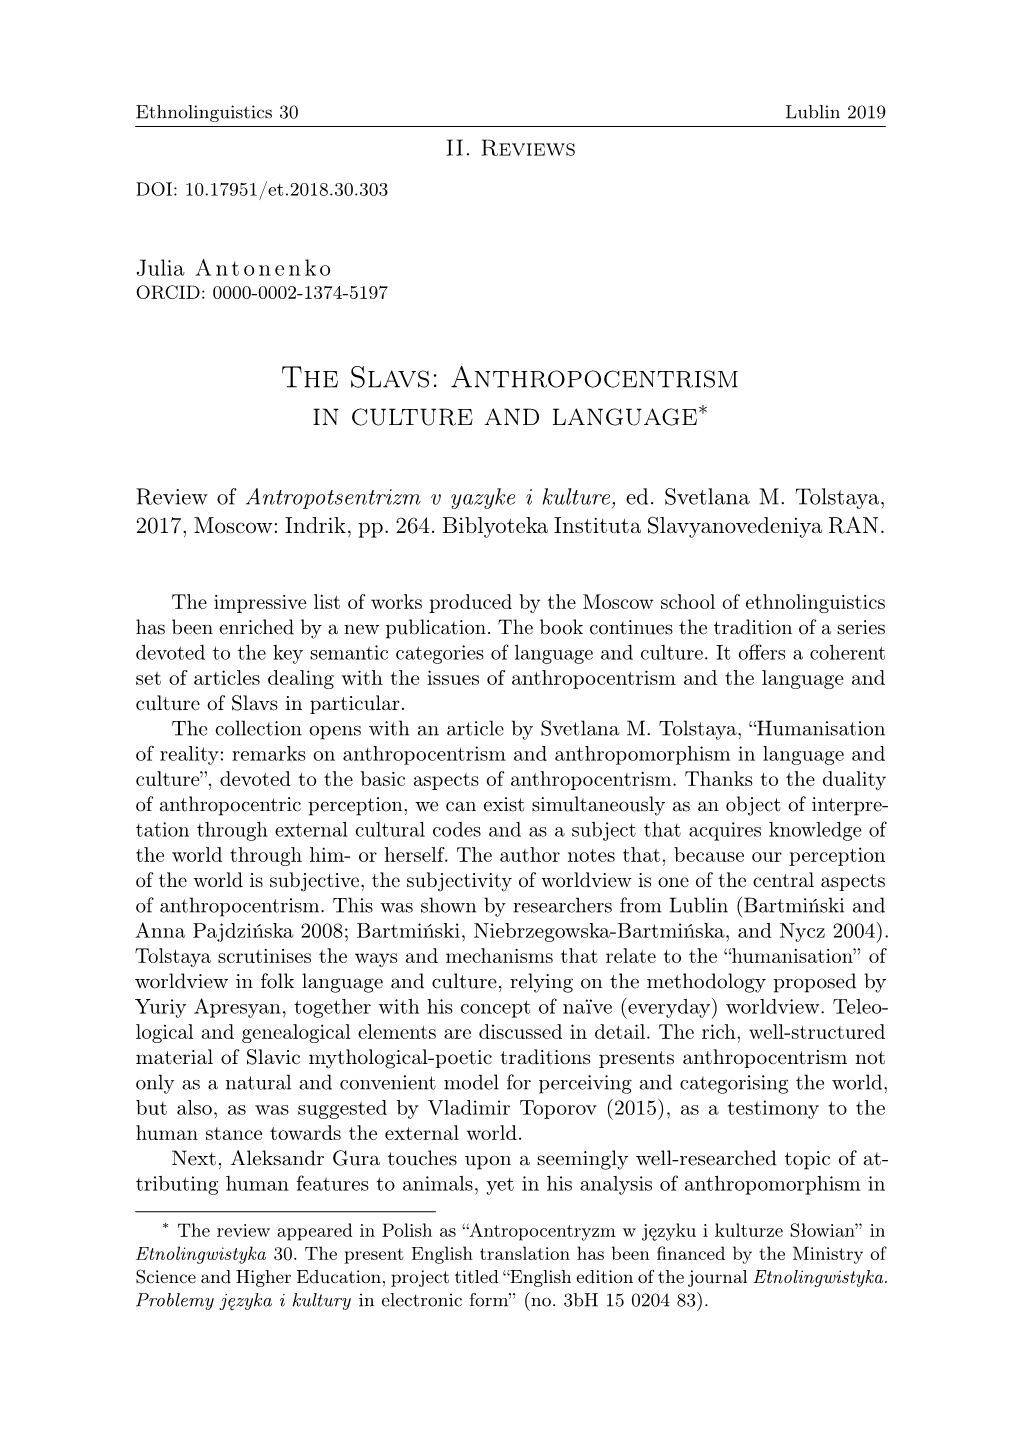 The Slavs: Anthropocentrism in Culture and Language∗